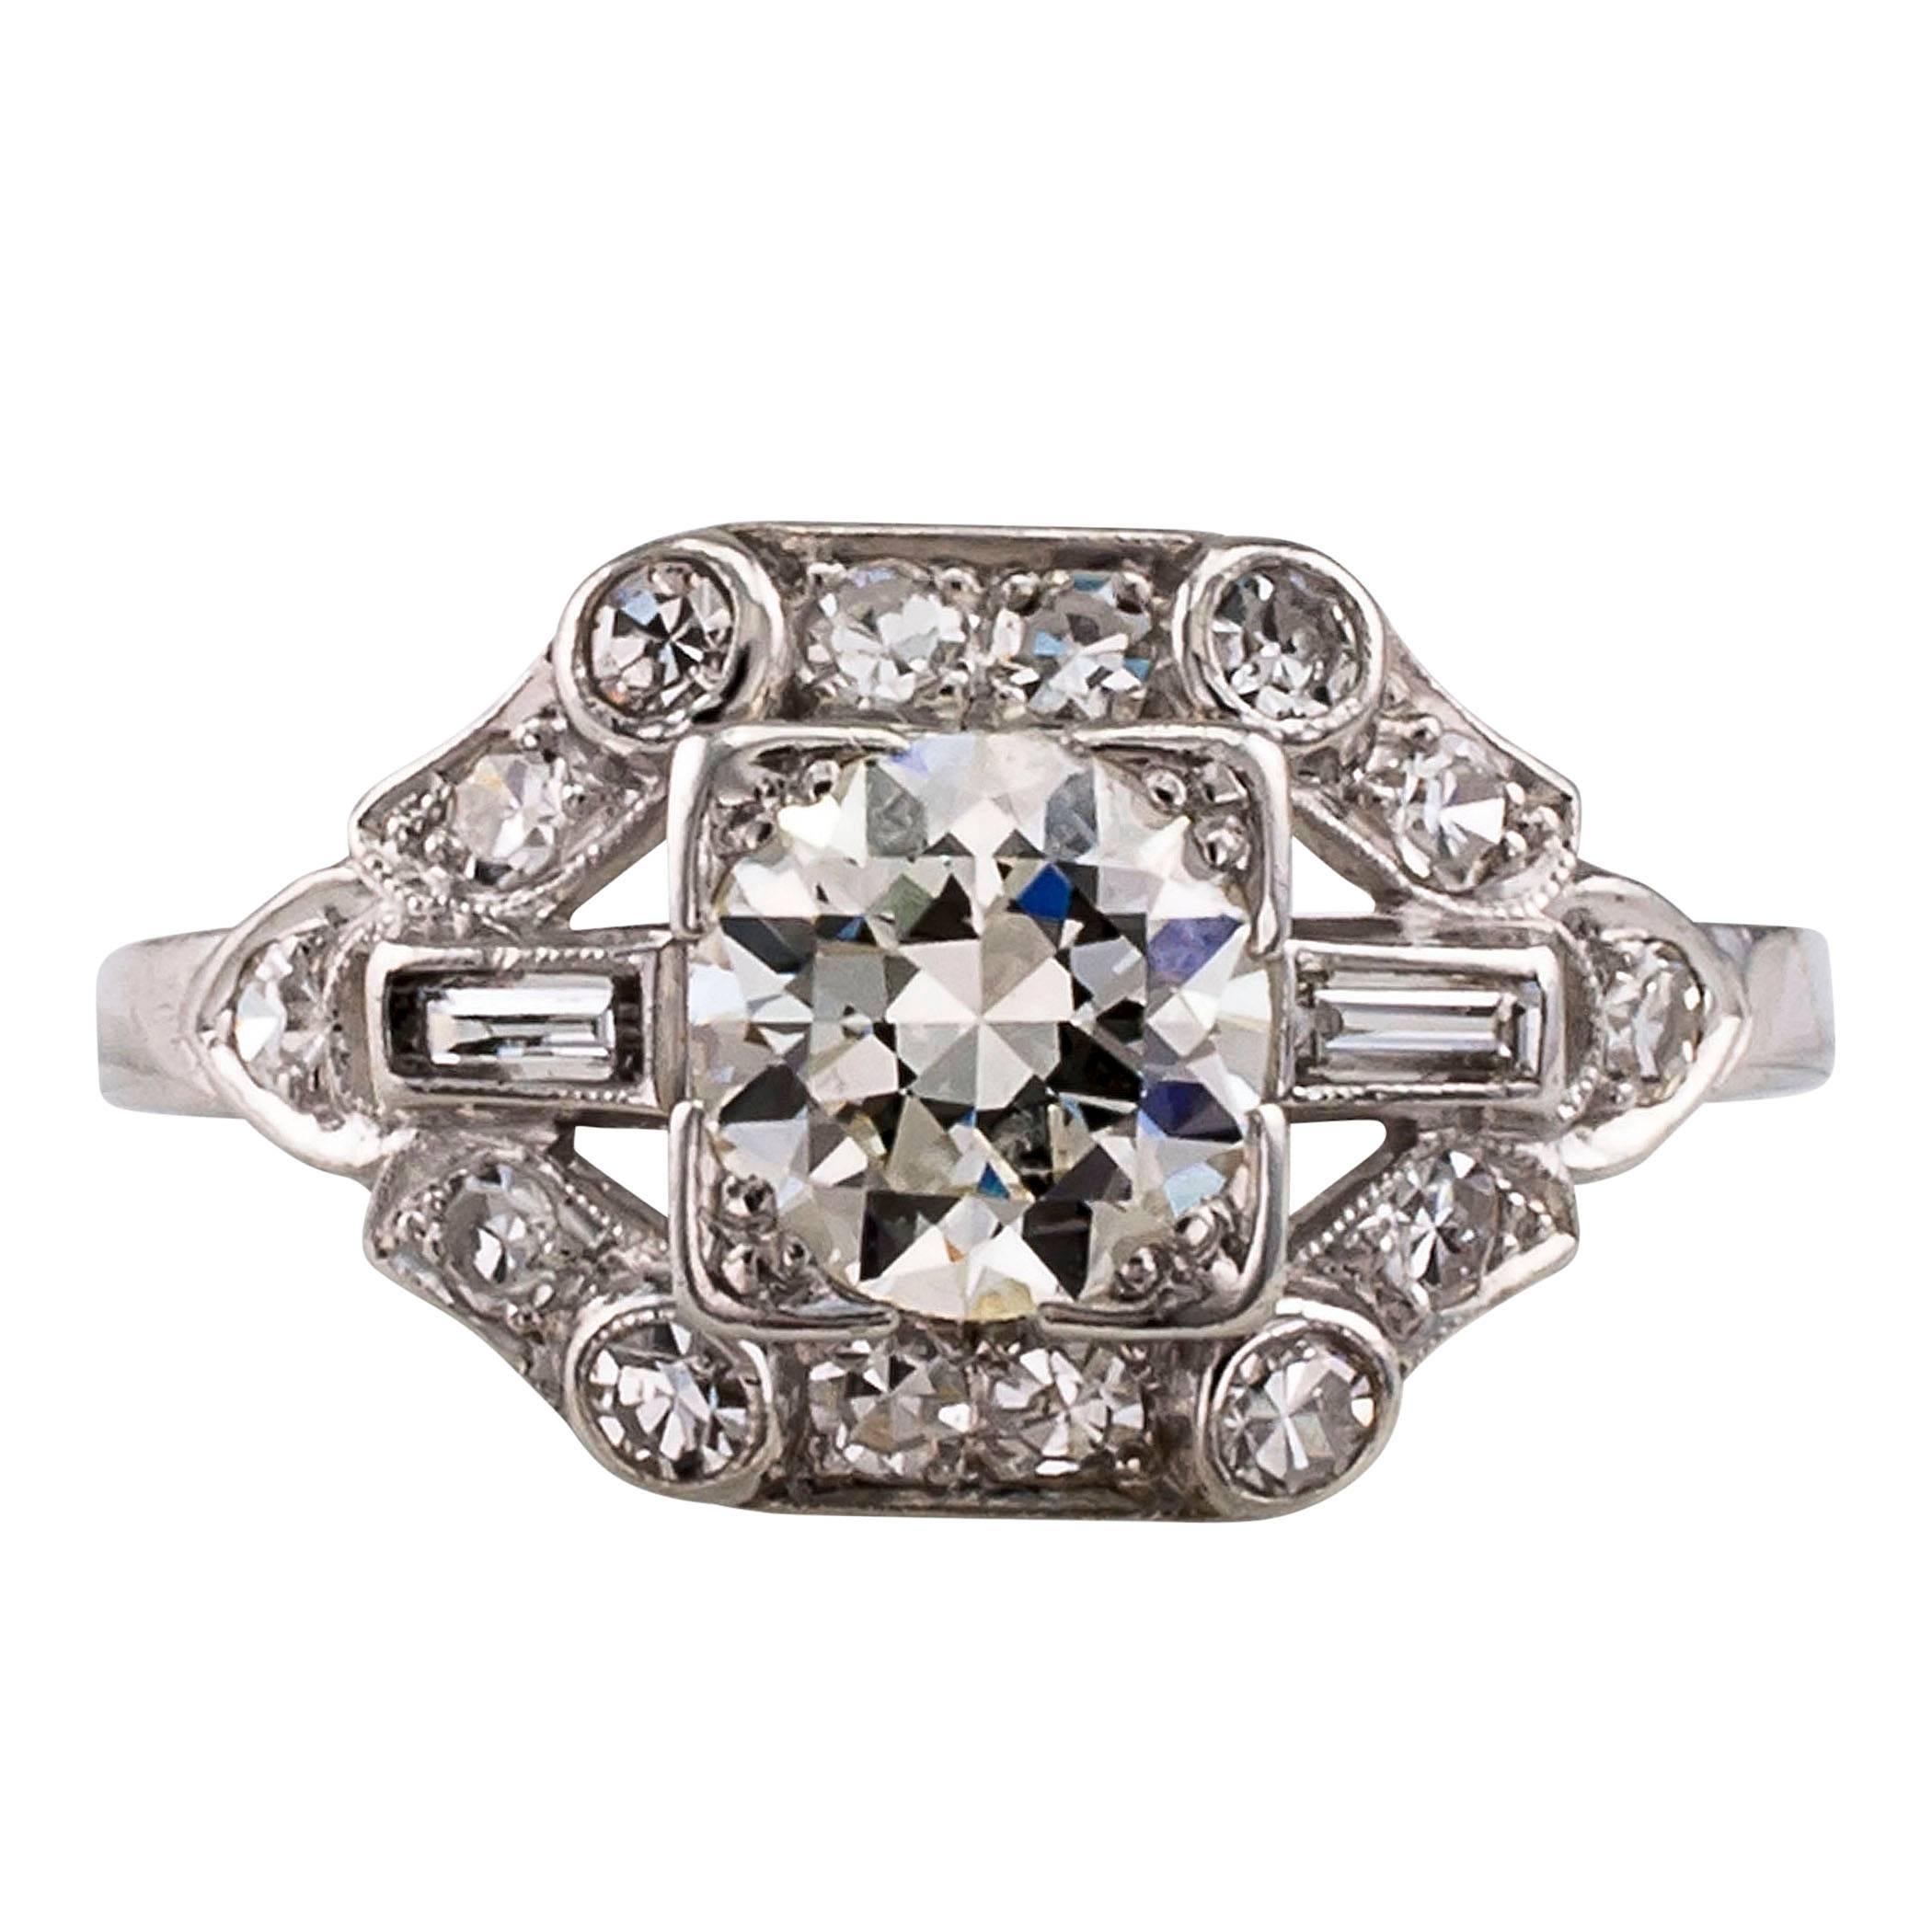 0.74 carat Art Deco 1930s diamond and platinum engagement ring. Centering upon an old transitional-cut diamond weighing approximately 0.74 carat, approximately J color and VS clarity, between baguette shoulders framed by smaller circular-cut